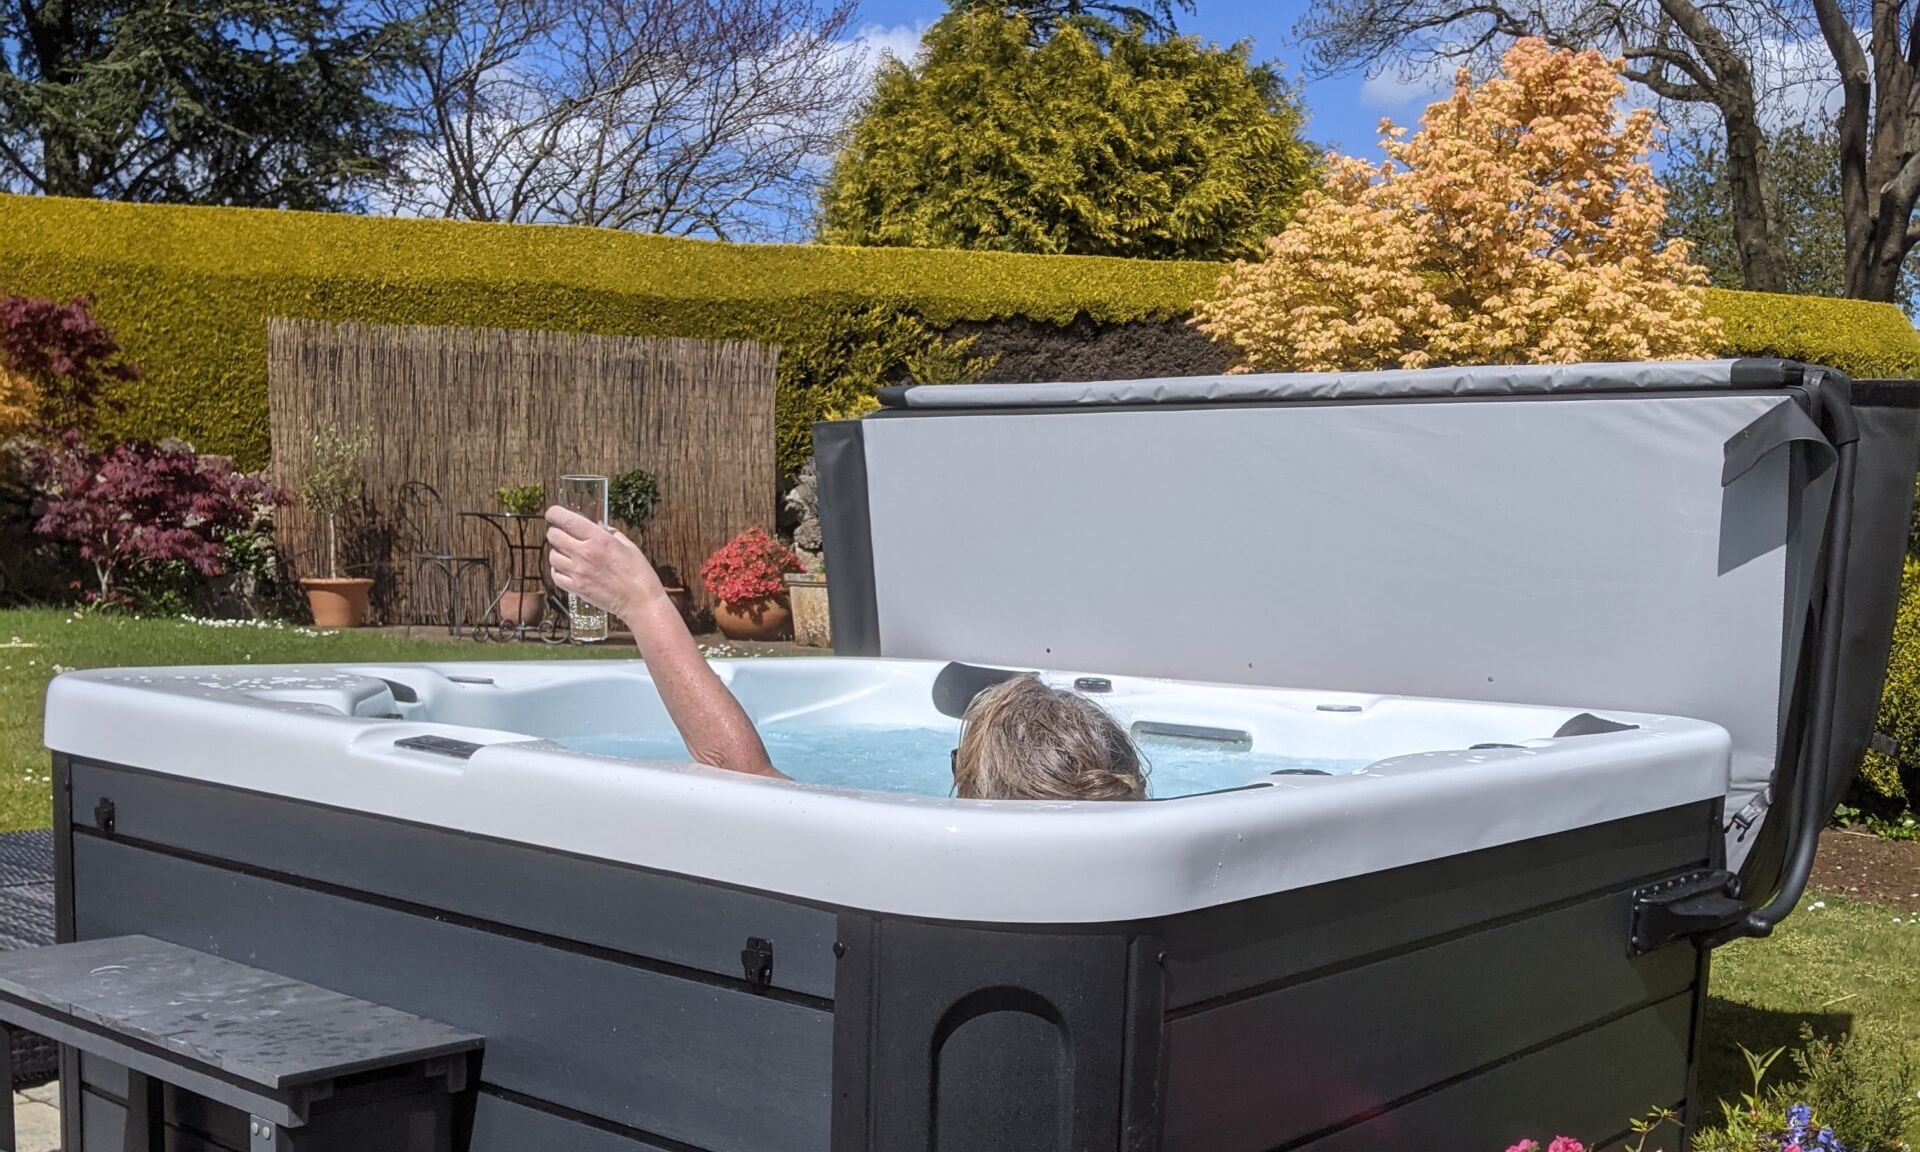 Health Benefits of Using a Hot Tub